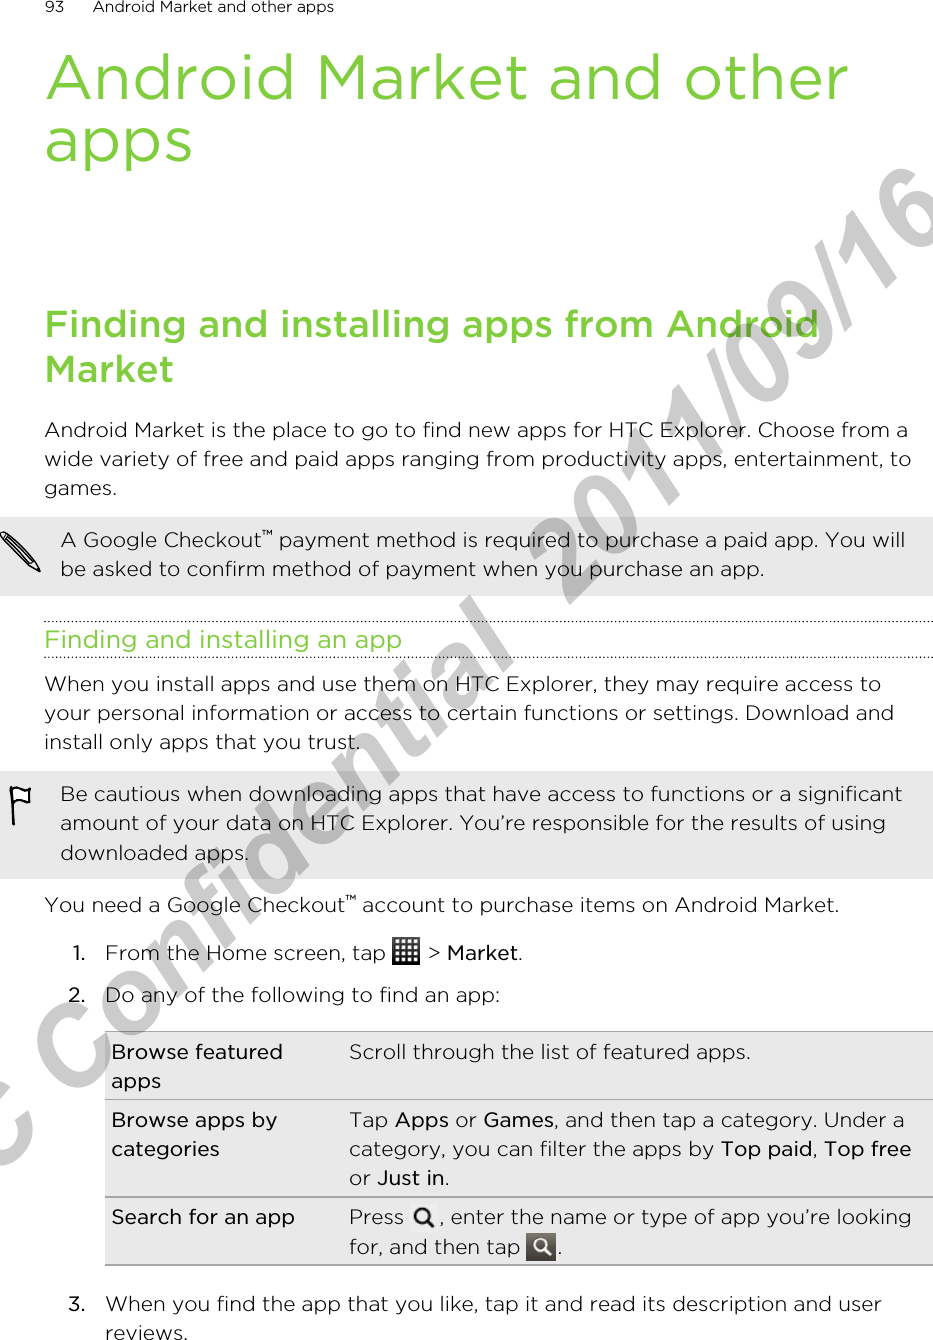 Android Market and otherappsFinding and installing apps from AndroidMarketAndroid Market is the place to go to find new apps for HTC Explorer. Choose from awide variety of free and paid apps ranging from productivity apps, entertainment, togames.A Google Checkout™ payment method is required to purchase a paid app. You willbe asked to confirm method of payment when you purchase an app.Finding and installing an appWhen you install apps and use them on HTC Explorer, they may require access toyour personal information or access to certain functions or settings. Download andinstall only apps that you trust.Be cautious when downloading apps that have access to functions or a significantamount of your data on HTC Explorer. You’re responsible for the results of usingdownloaded apps.You need a Google Checkout™ account to purchase items on Android Market.1. From the Home screen, tap   &gt; Market.2. Do any of the following to find an app:Browse featuredappsScroll through the list of featured apps.Browse apps bycategoriesTap Apps or Games, and then tap a category. Under acategory, you can filter the apps by Top paid, Top freeor Just in.Search for an app Press  , enter the name or type of app you’re lookingfor, and then tap  .3. When you find the app that you like, tap it and read its description and userreviews.93 Android Market and other appsHTC Confidential  2011/09/16 